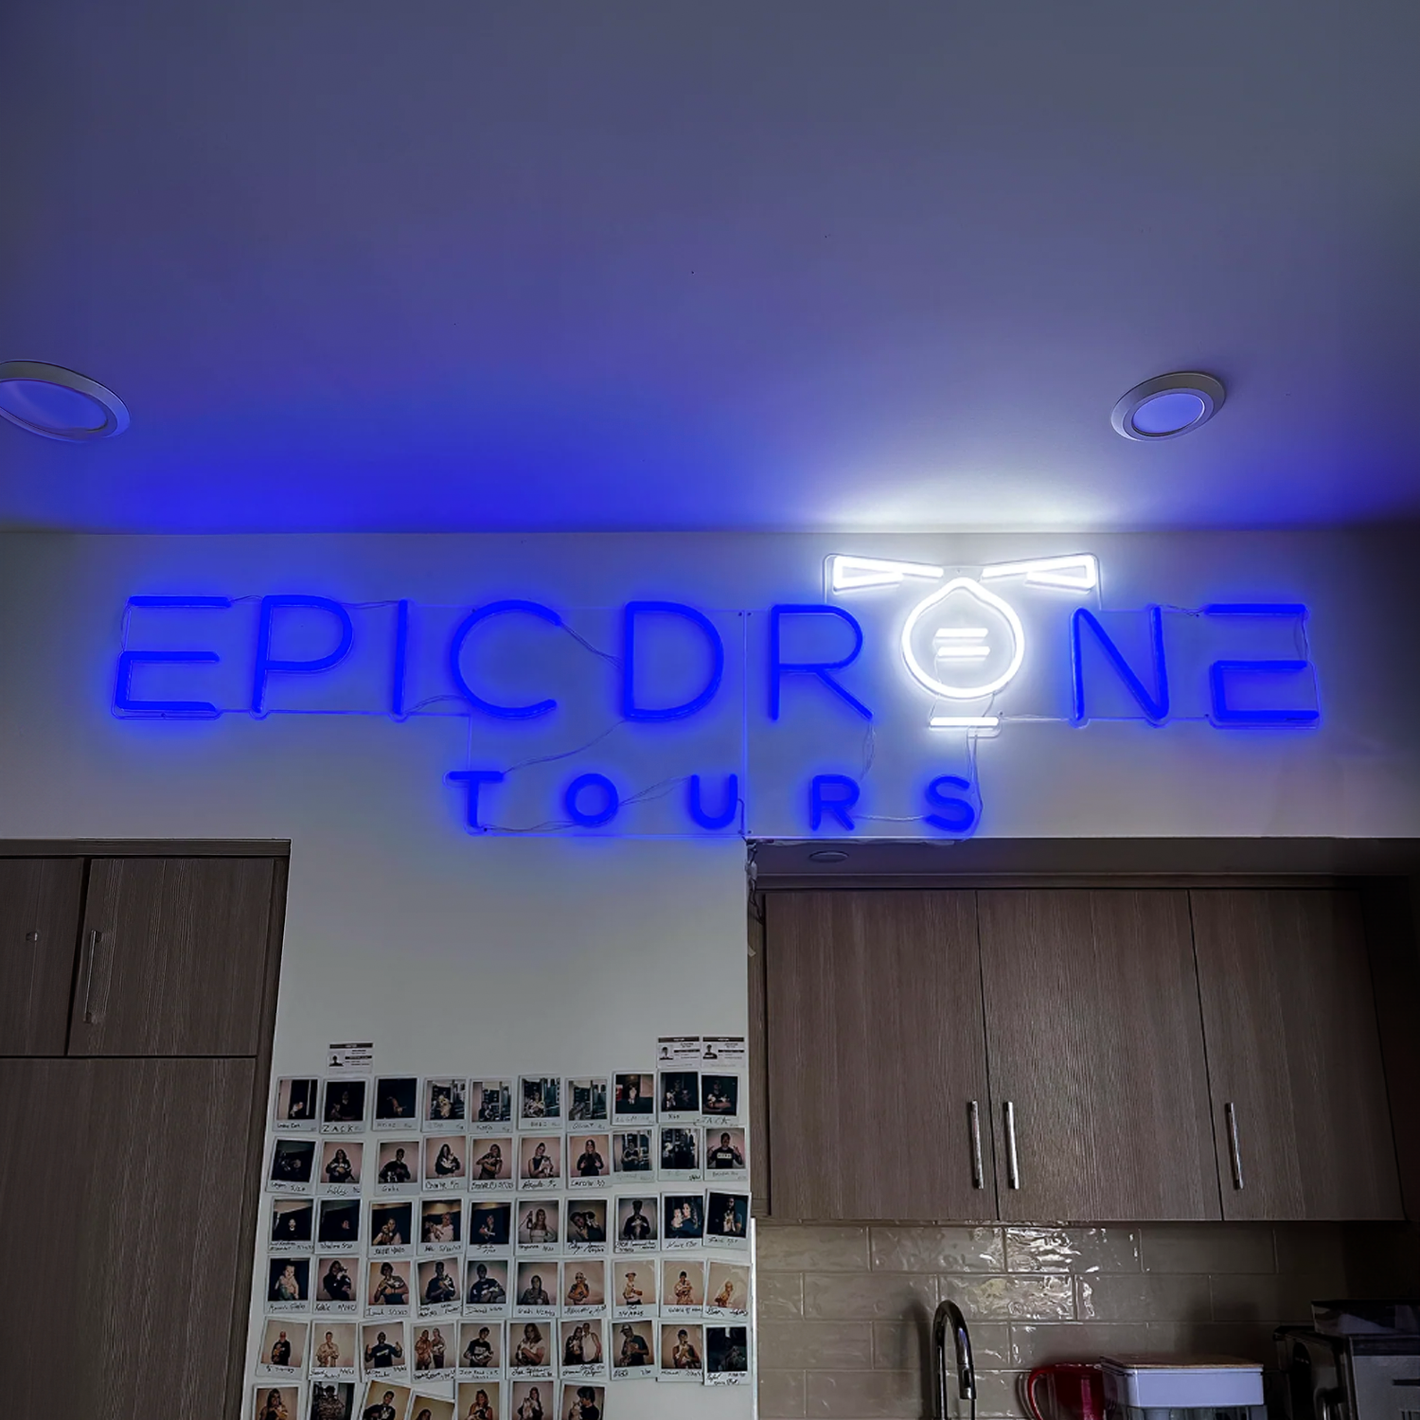 Custom neon sign by Valoneon